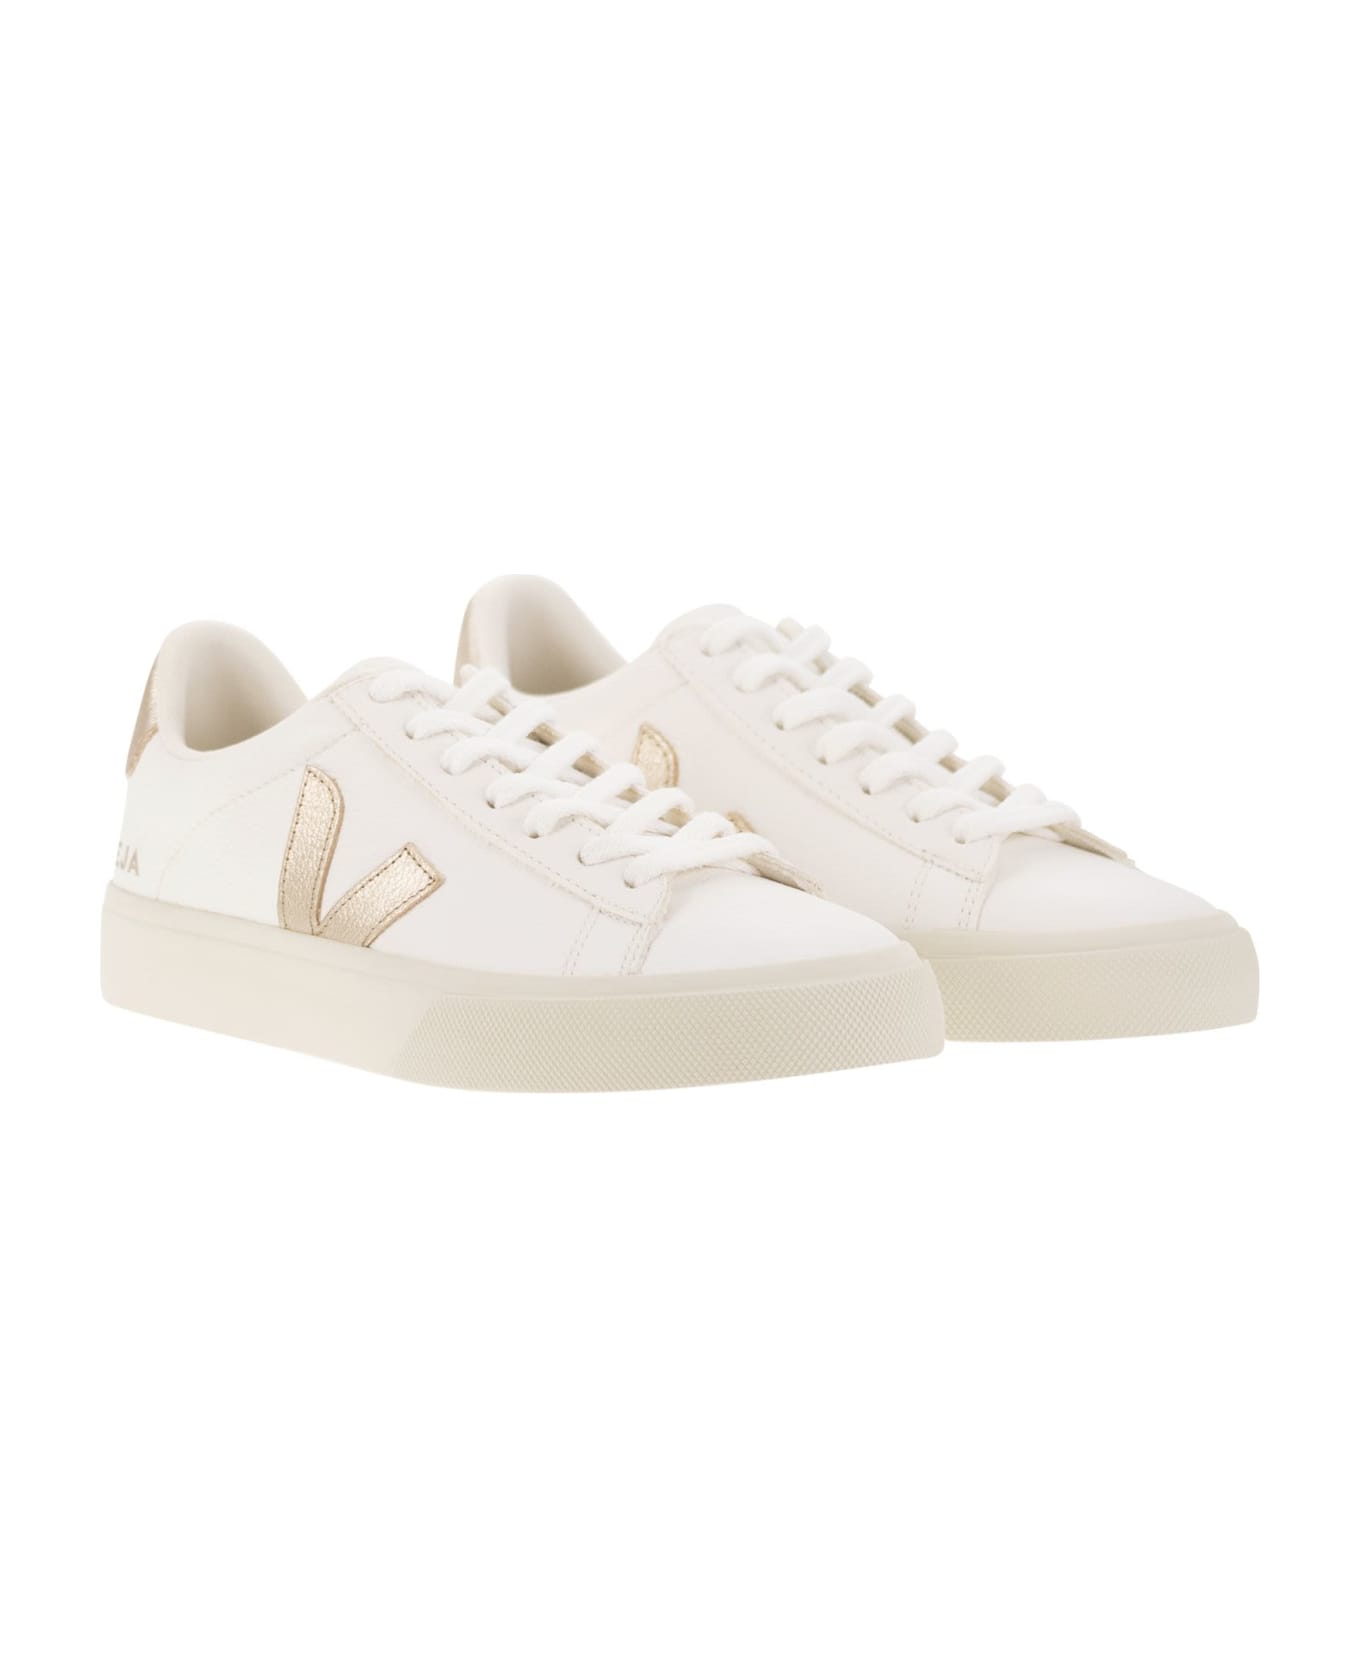 Veja Chromefree Leather Trainers - White/gold